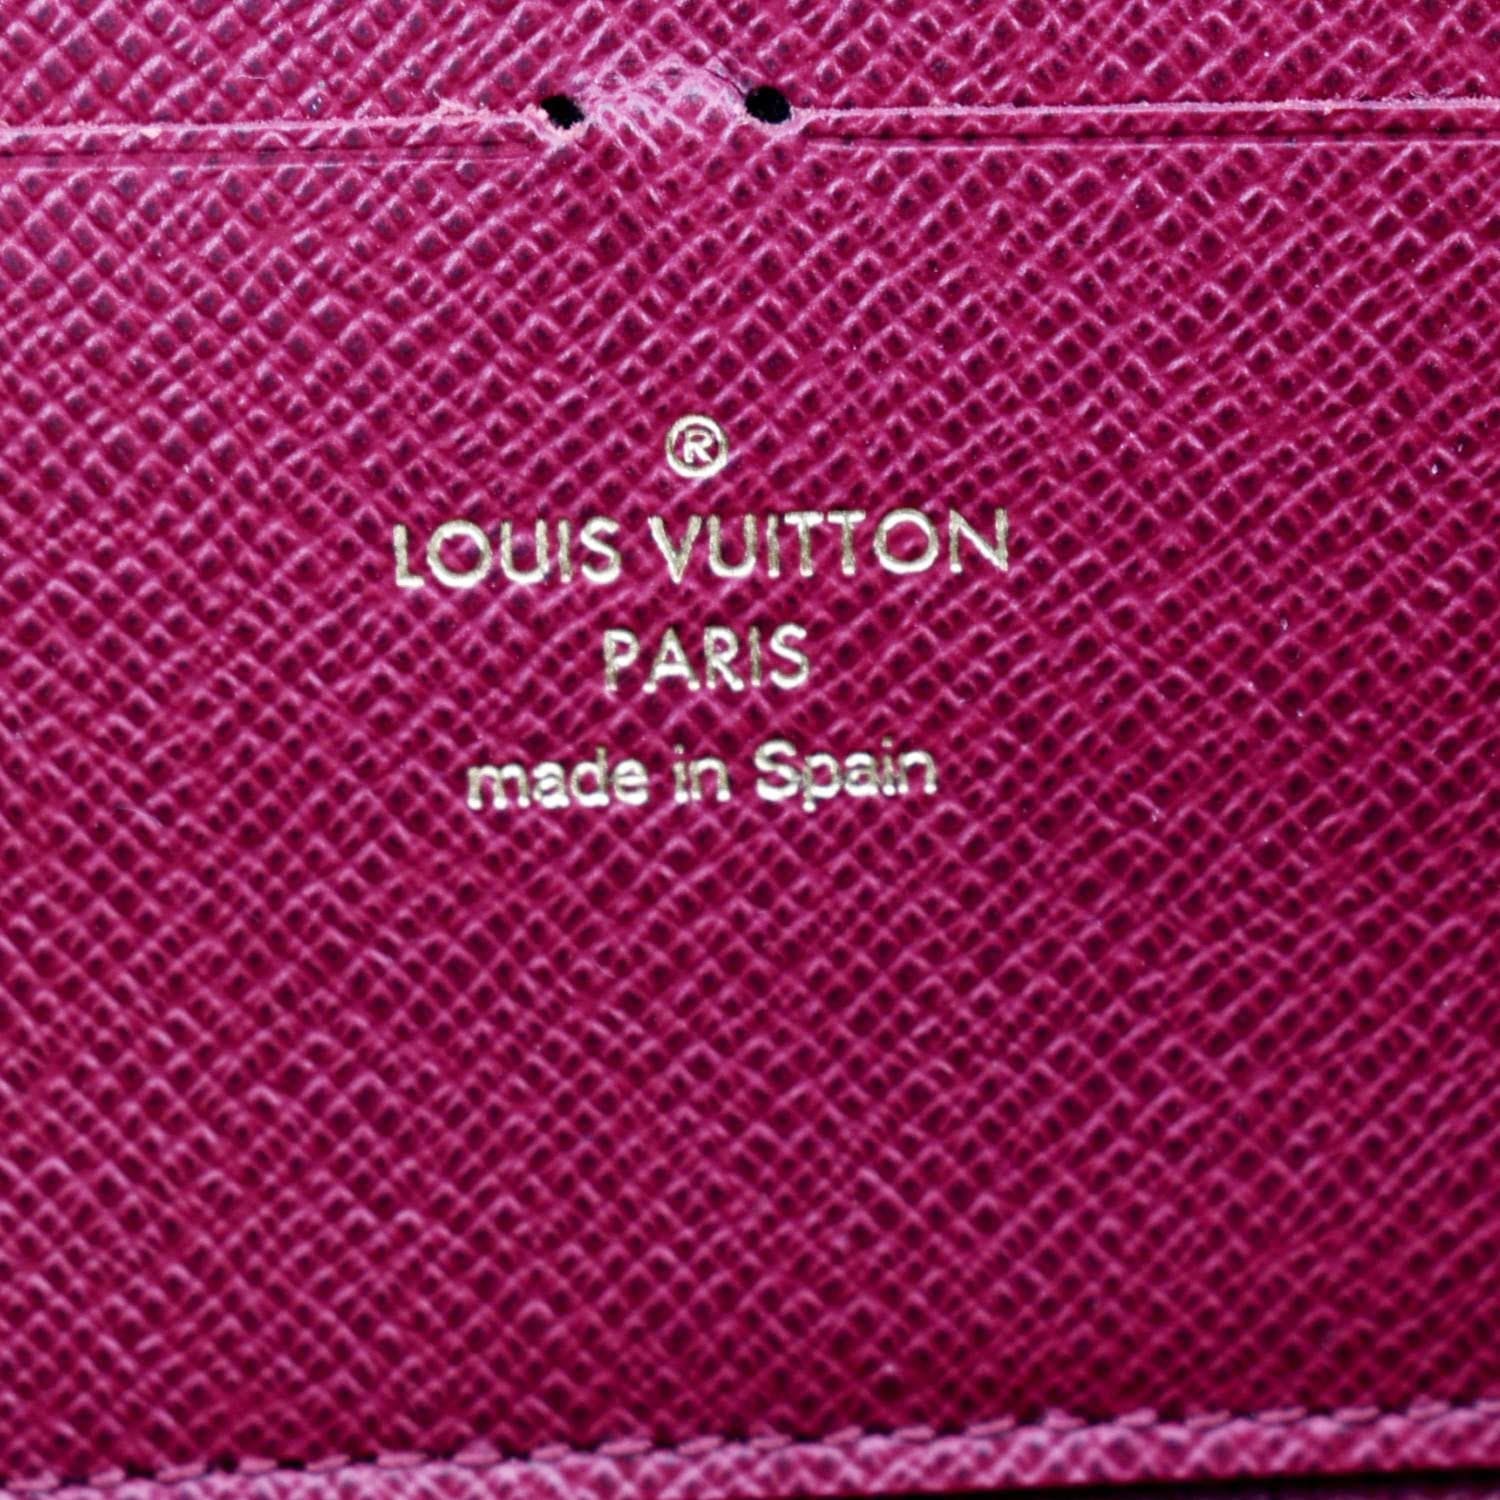 Clemence cloth wallet Louis Vuitton Brown in Cloth - 37320794